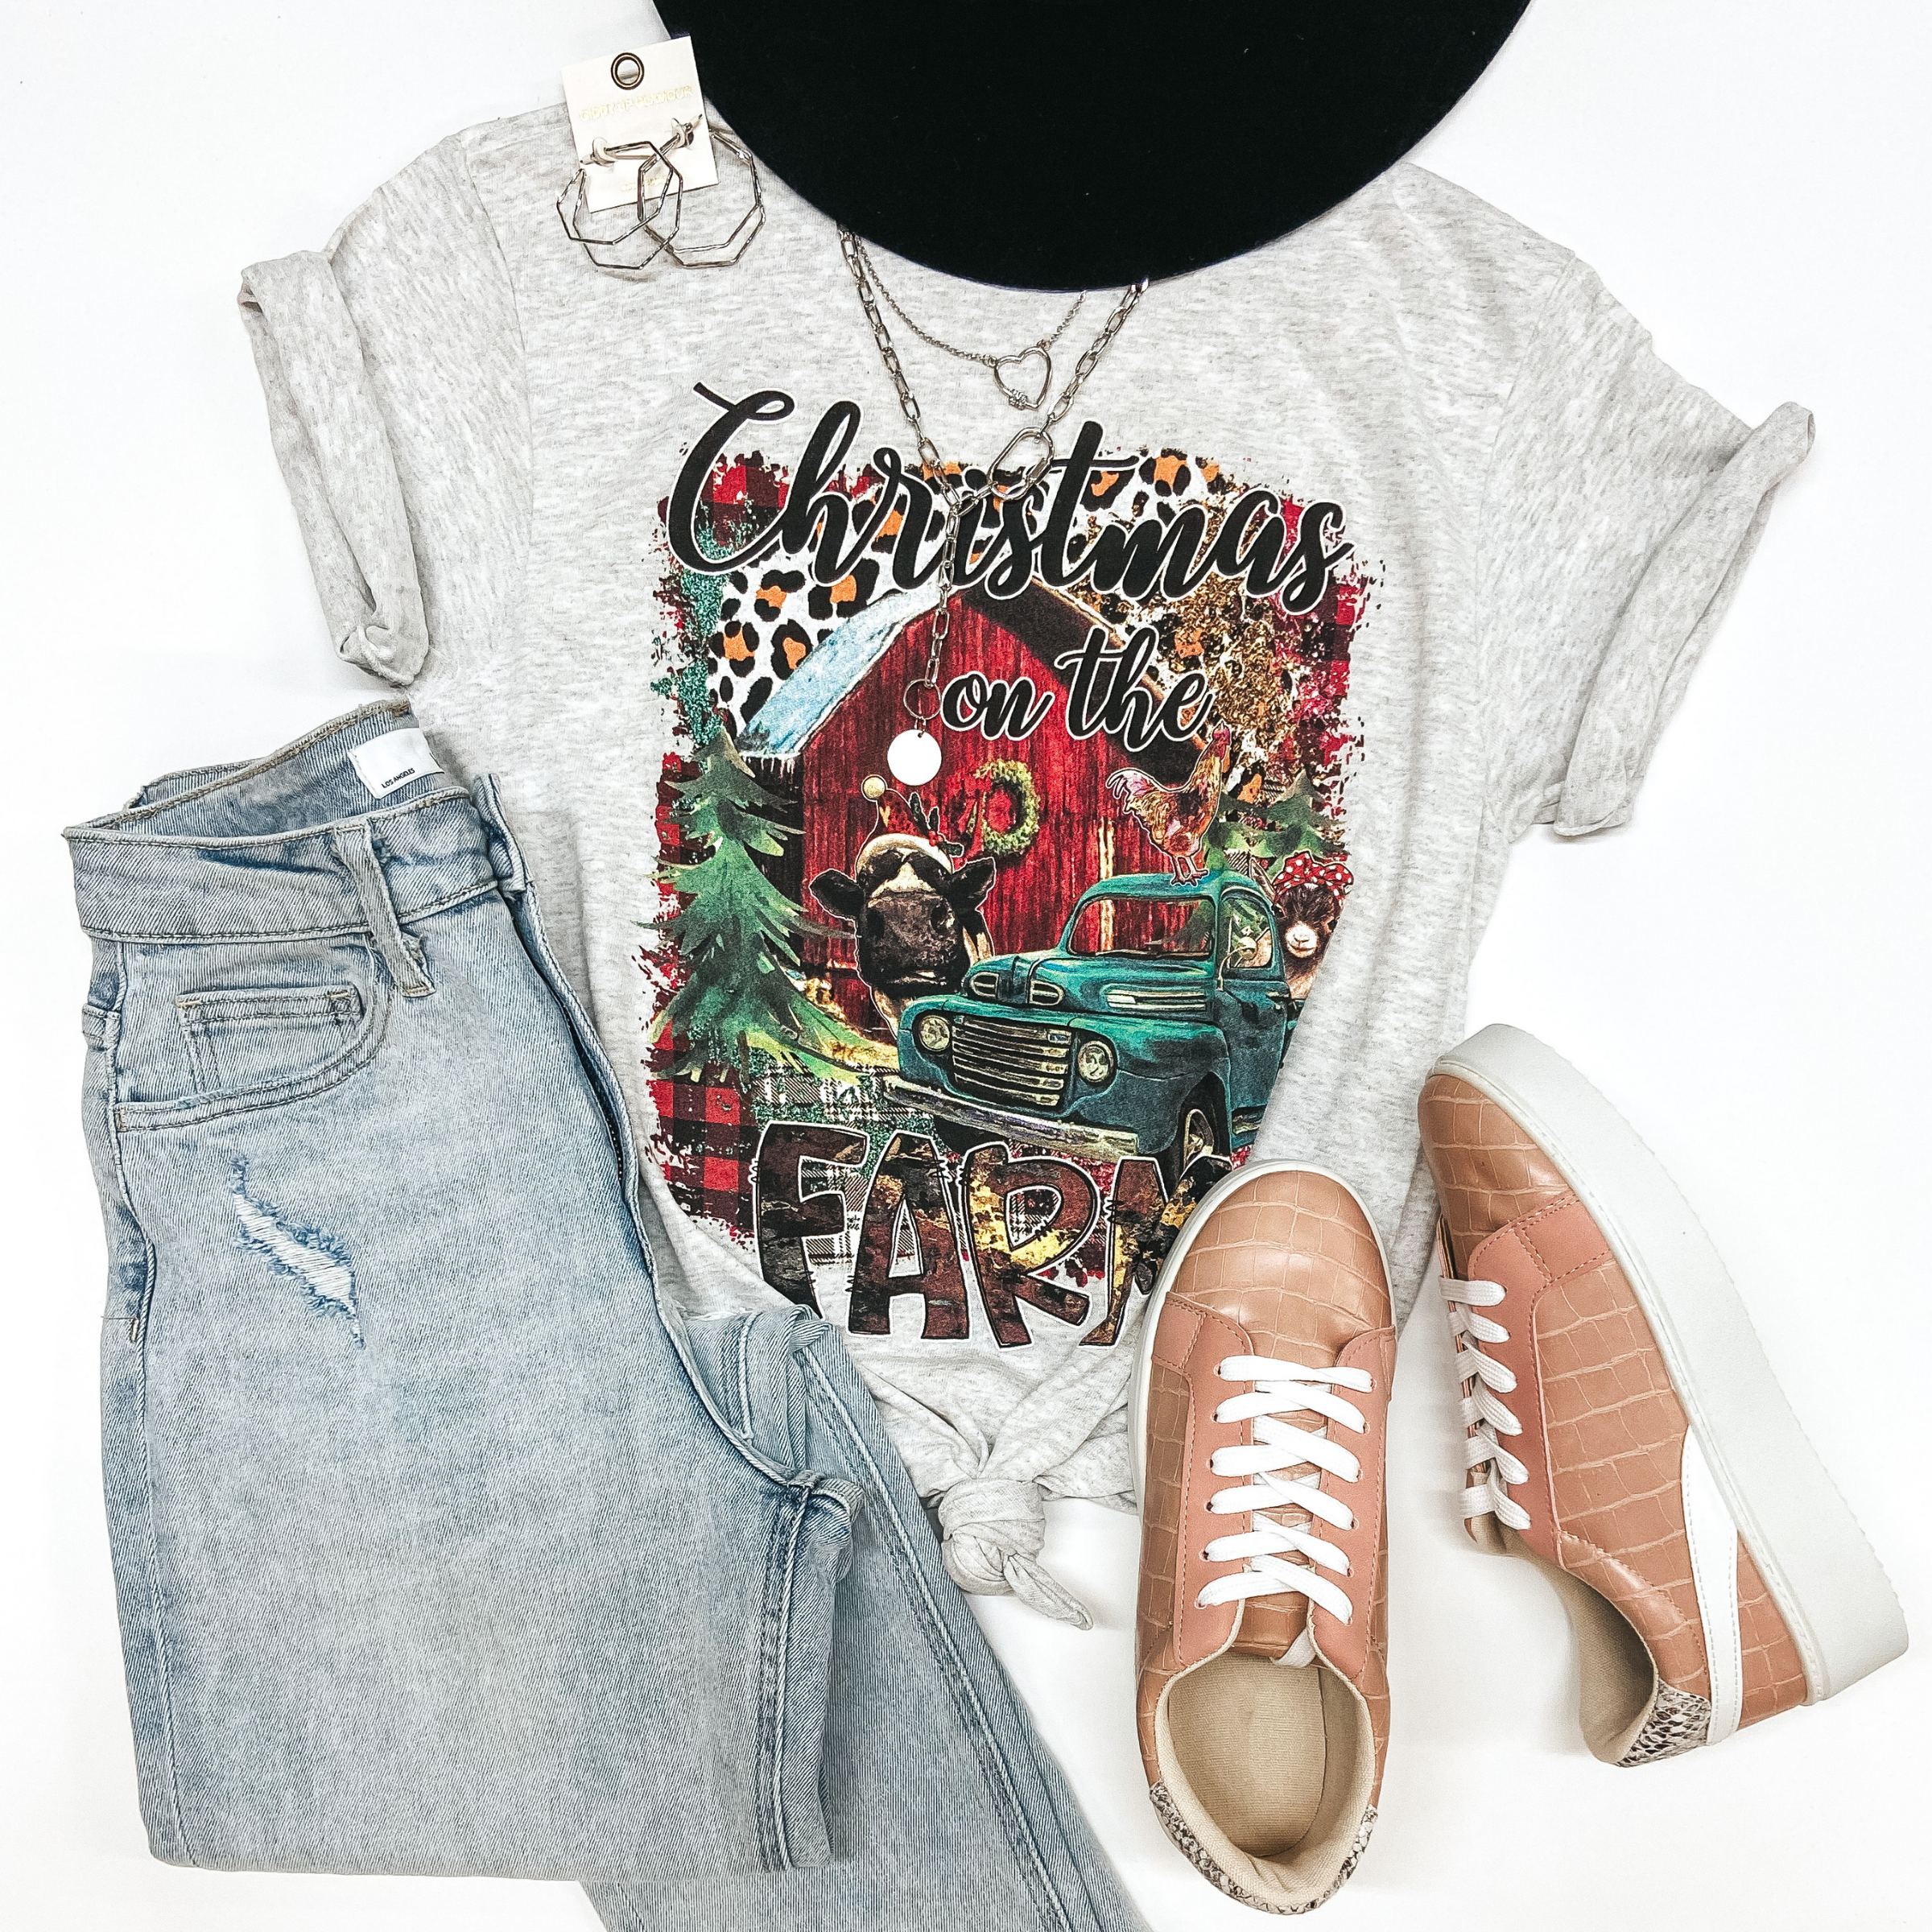 Christmas On the Farm Short Sleeve Graphic Tee in Light Heather Grey - Giddy Up Glamour Boutique